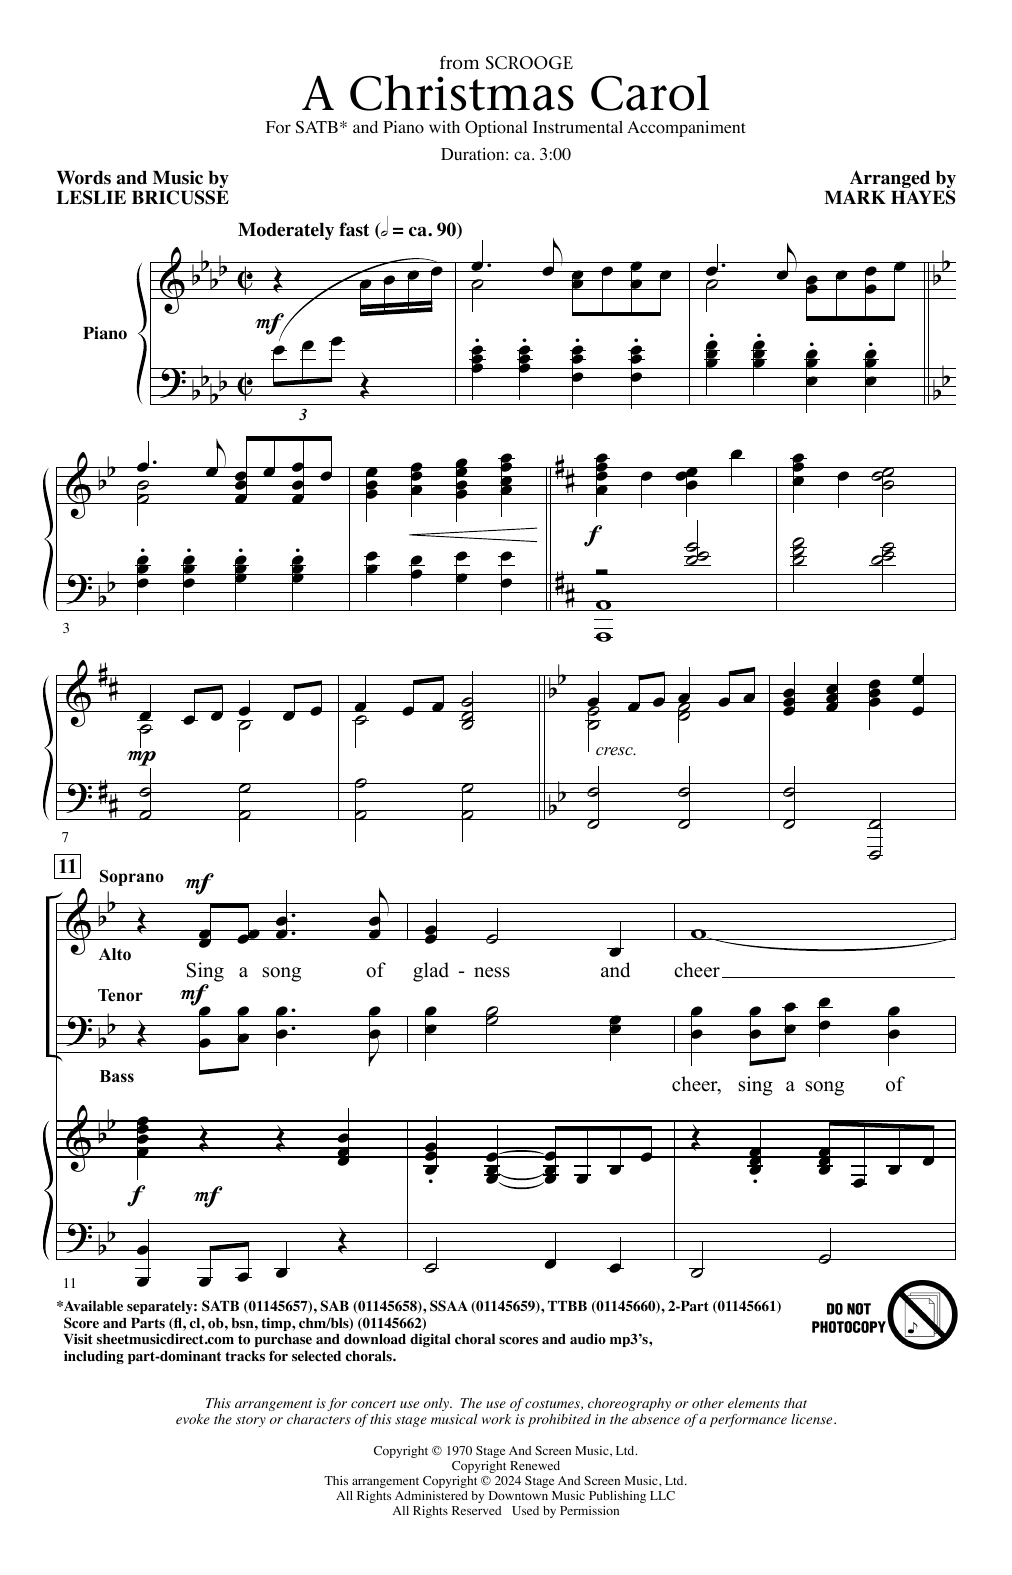 Leslie Bricusse A Christmas Carol (from Scrooge) (arr. Mark Hayes) sheet music notes printable PDF score